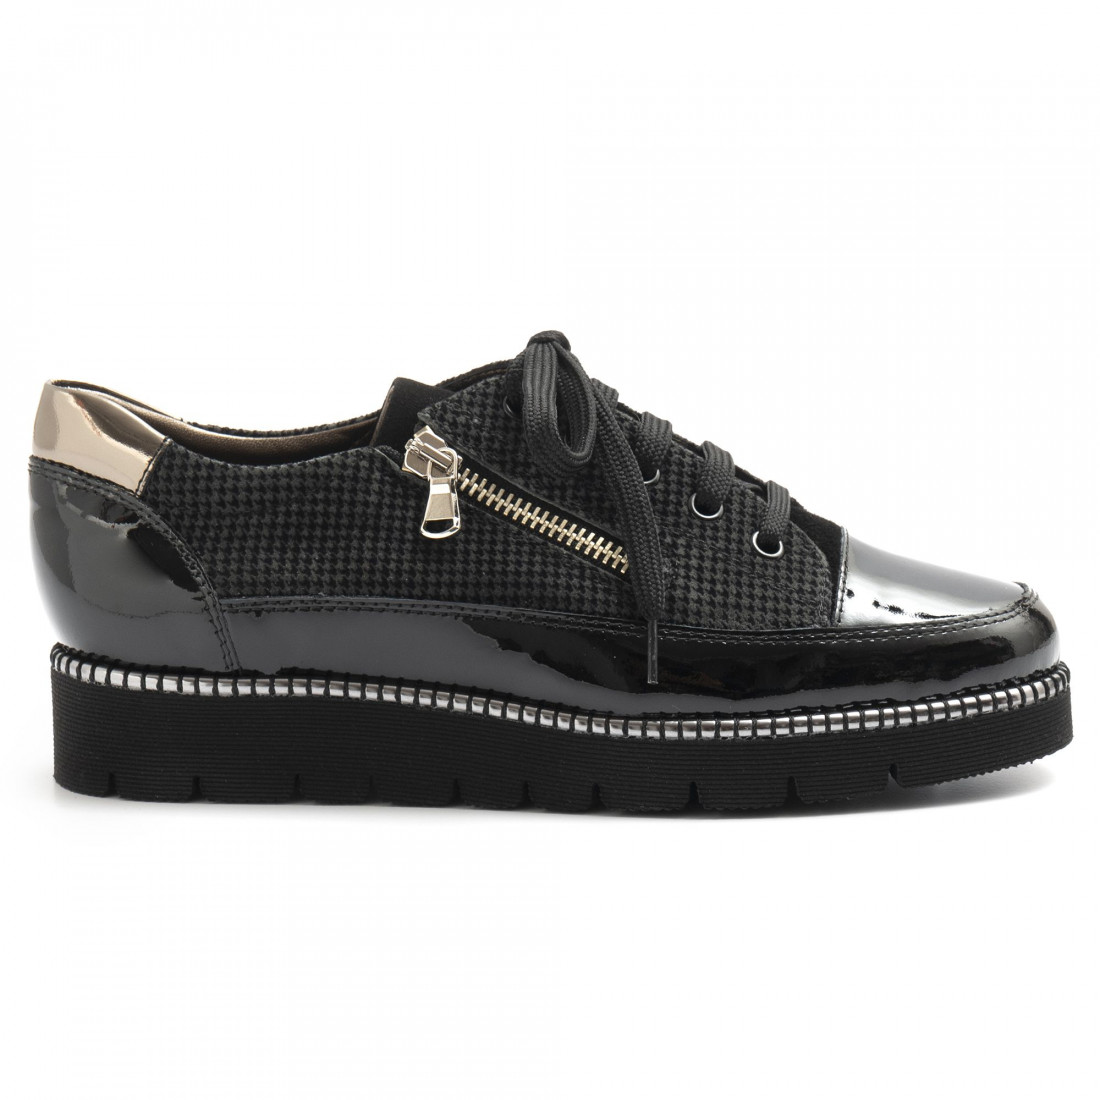 Black leather Philosophy Alfredo Giantin shoes with side zip